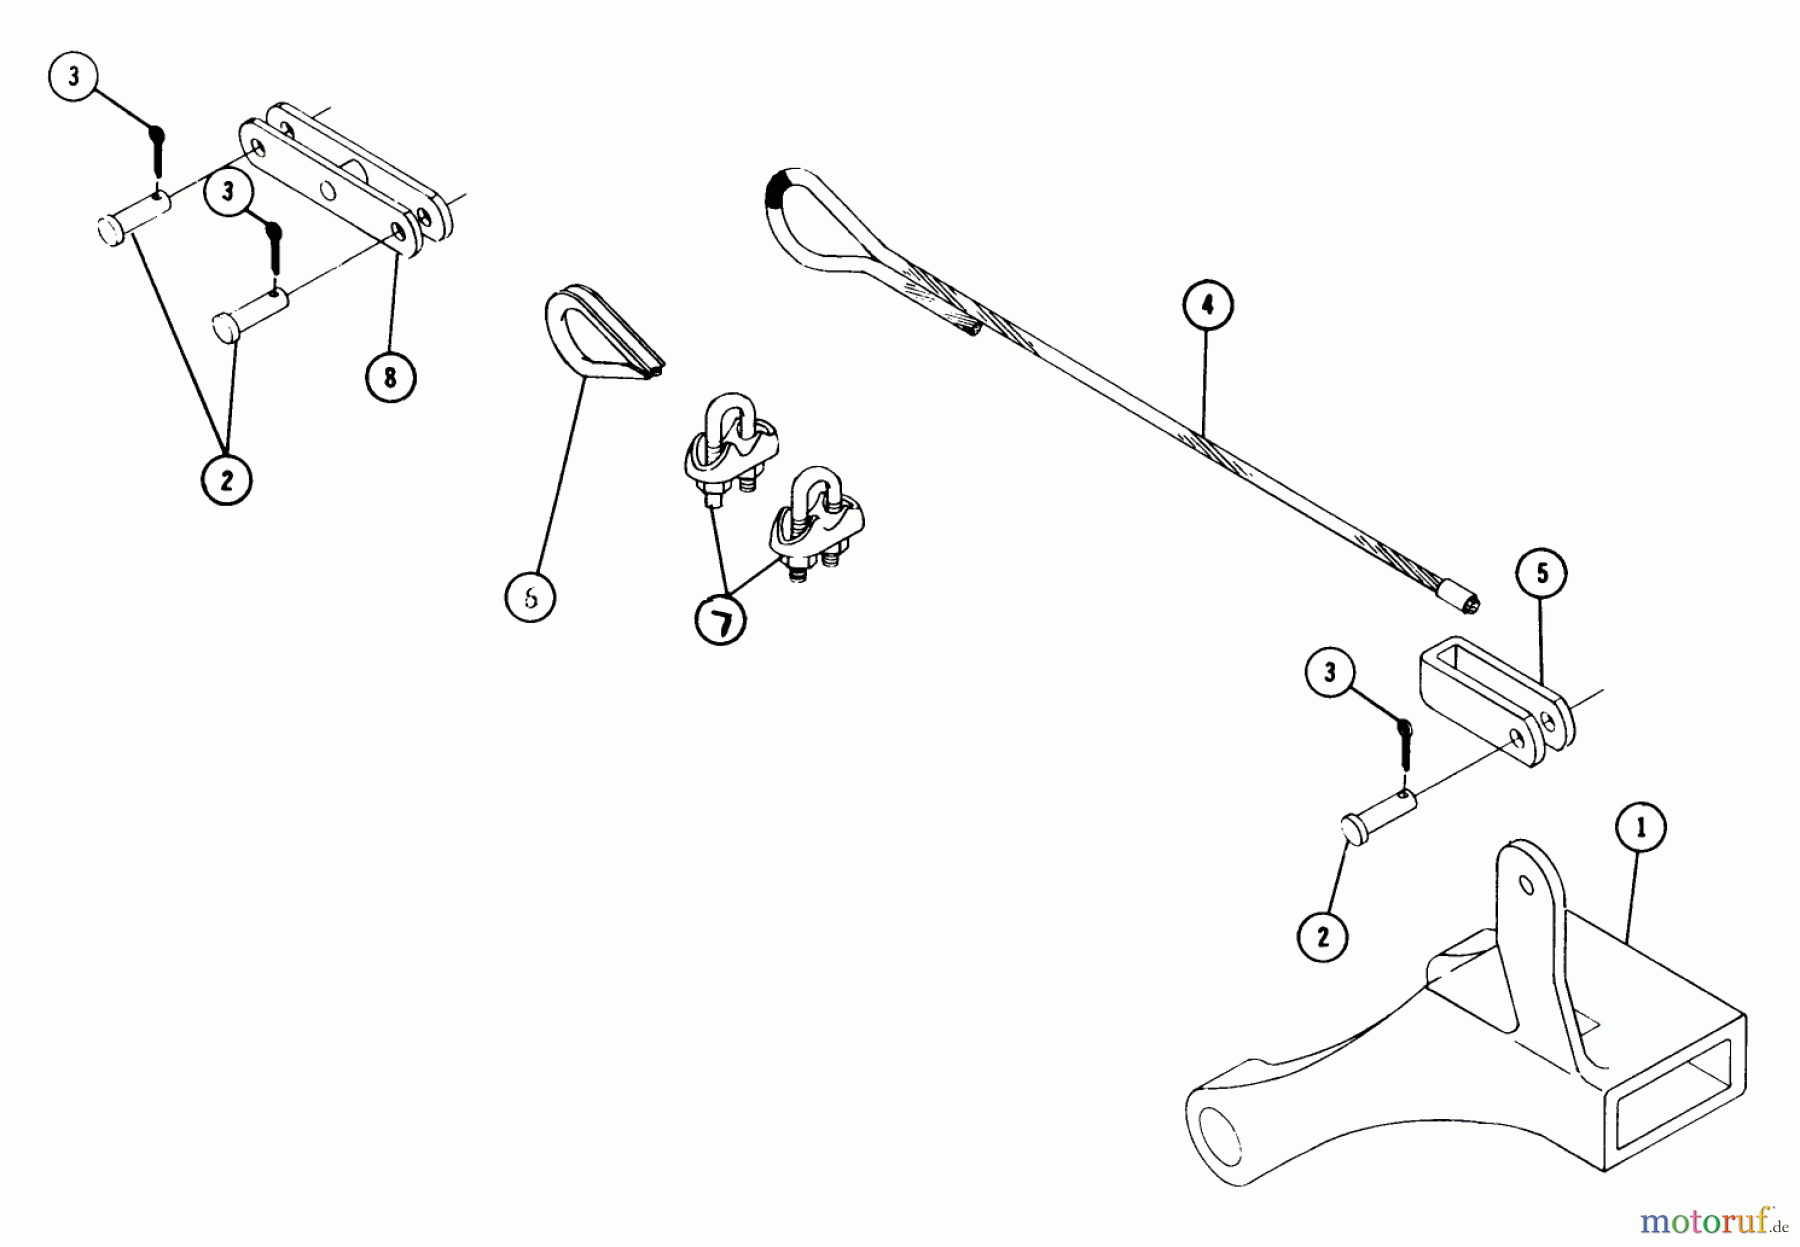  Toro Neu Accessories, Mower 85411 - Toro 3-Point Hitch, 1969 PARTS LIST-IMPLEMENT HITCH (SLOT TYPE) FACTORY ORDER NUMBER 8-5521